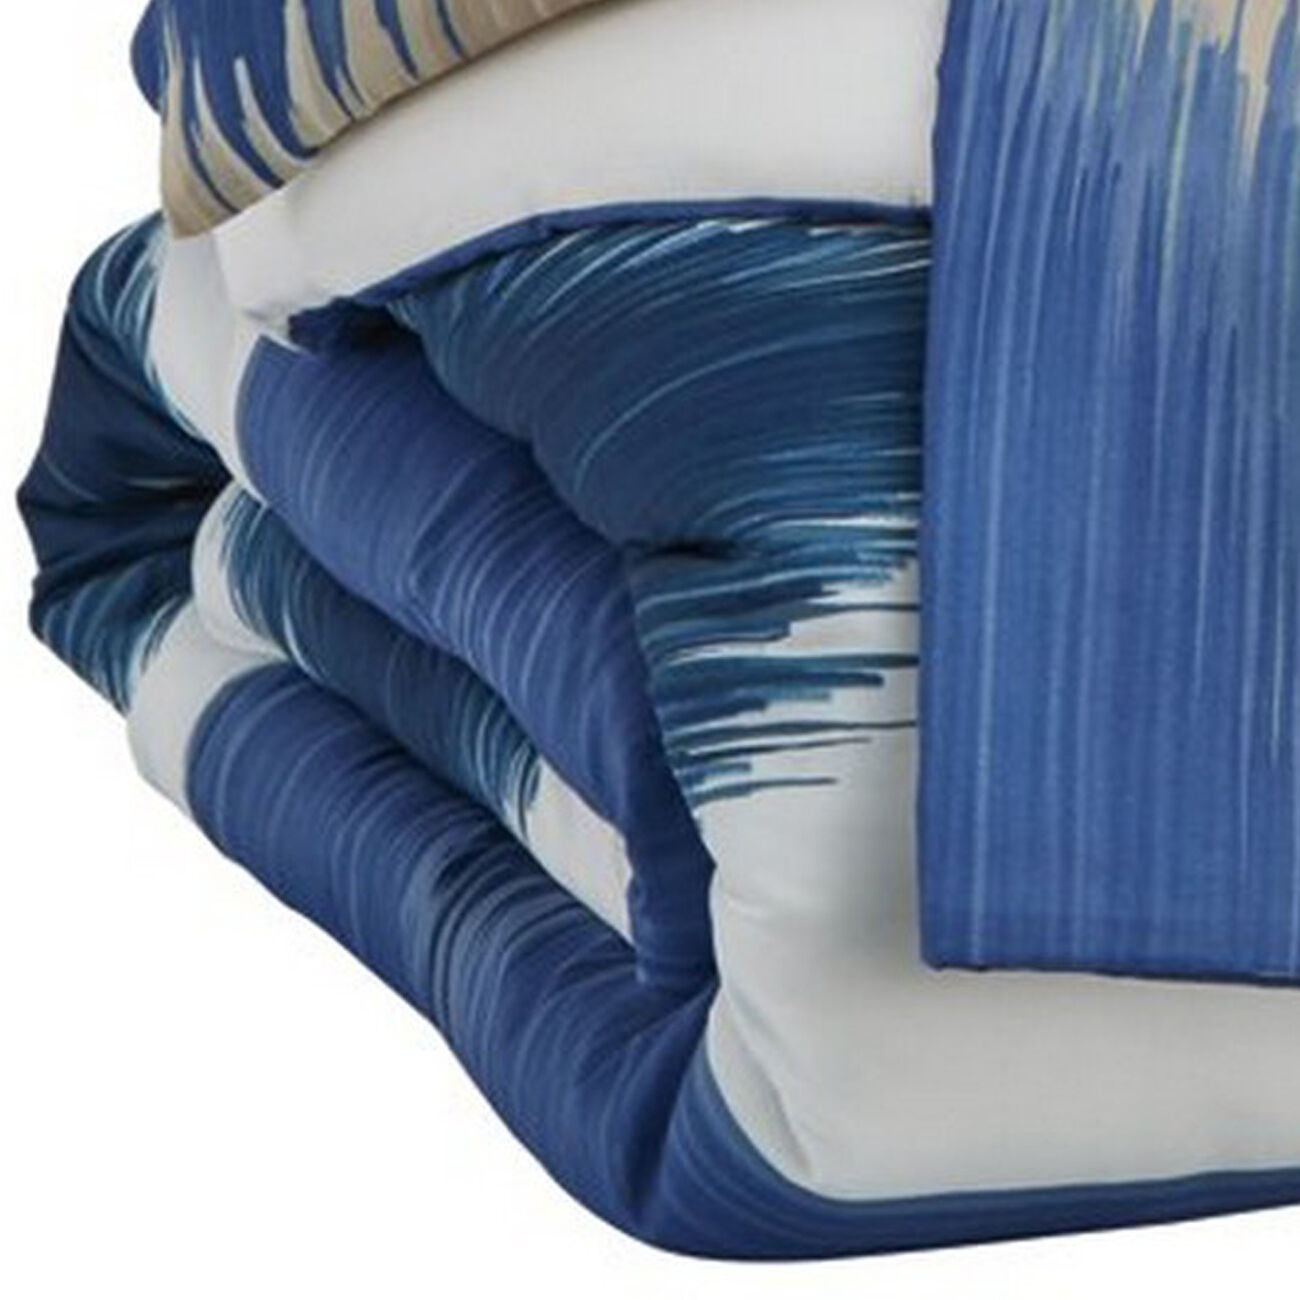 3 Piece Fabric King Comforter Set with Striped Print, Blue and White